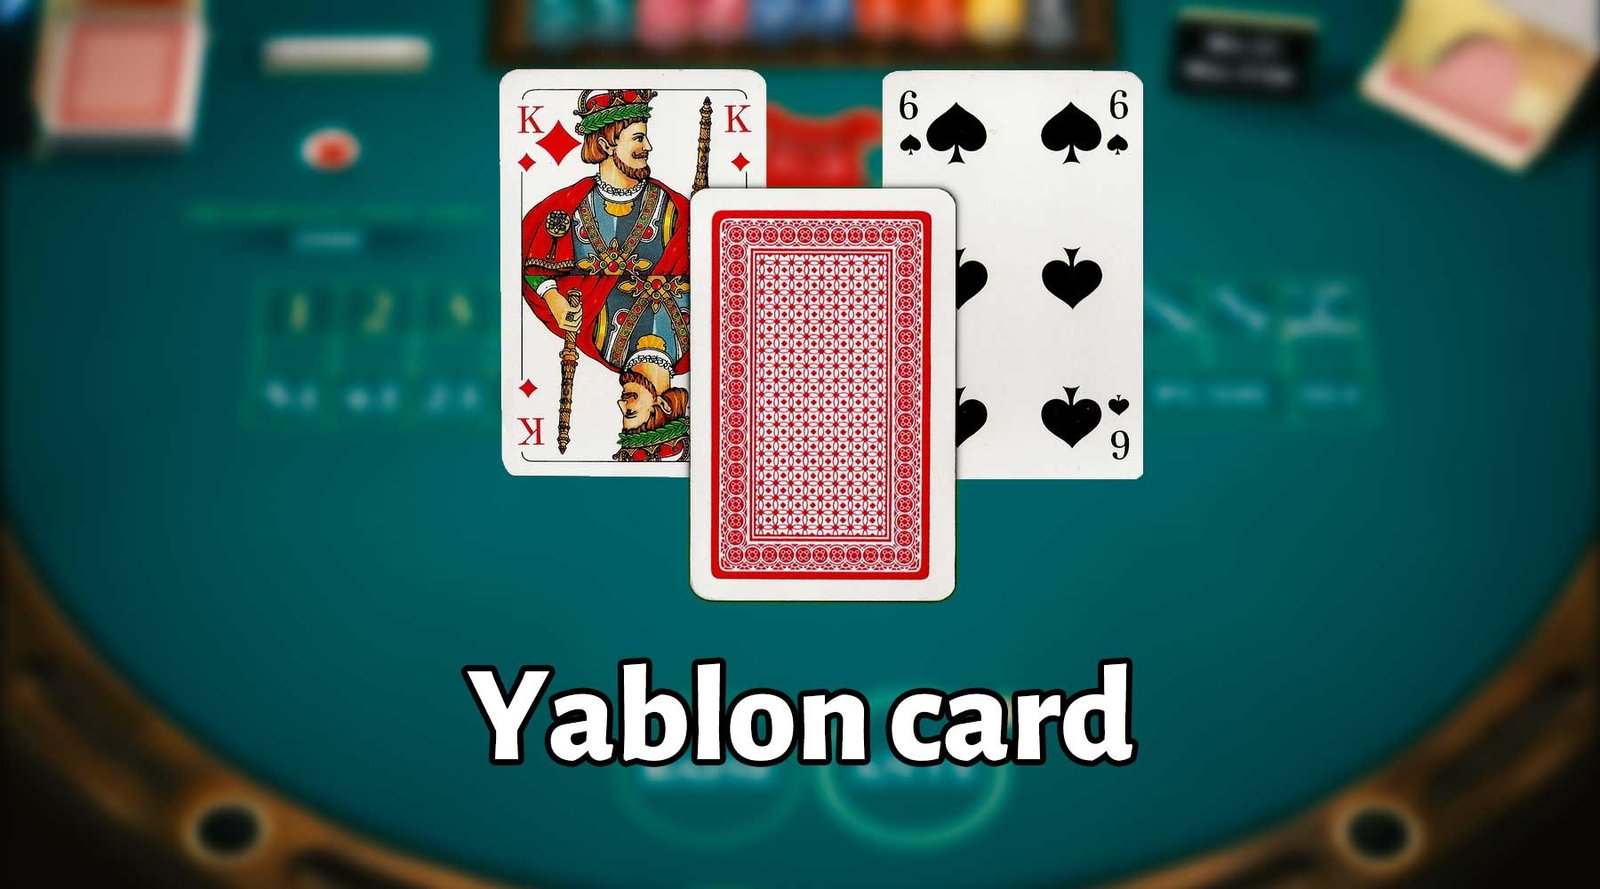 What is Yablon card game?